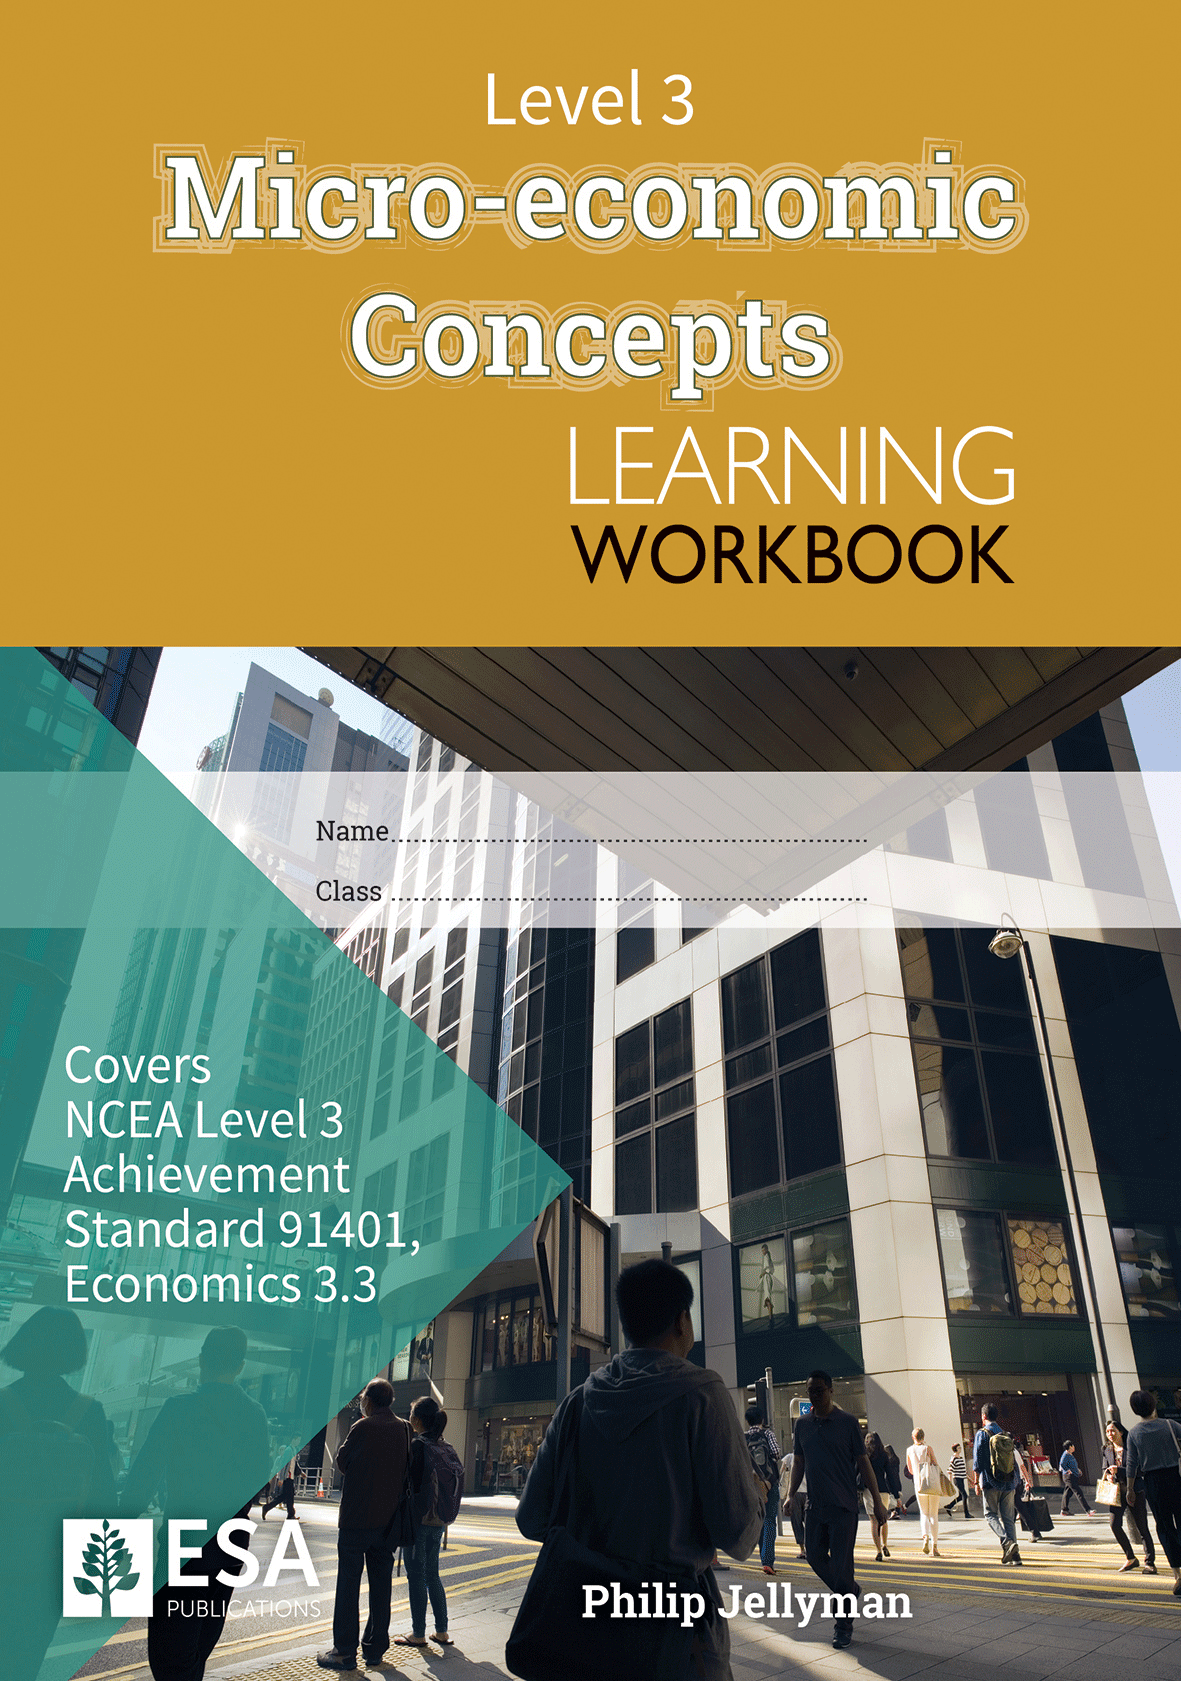 Level 3 Micro-economic Concepts 3.3 Learning Workbook